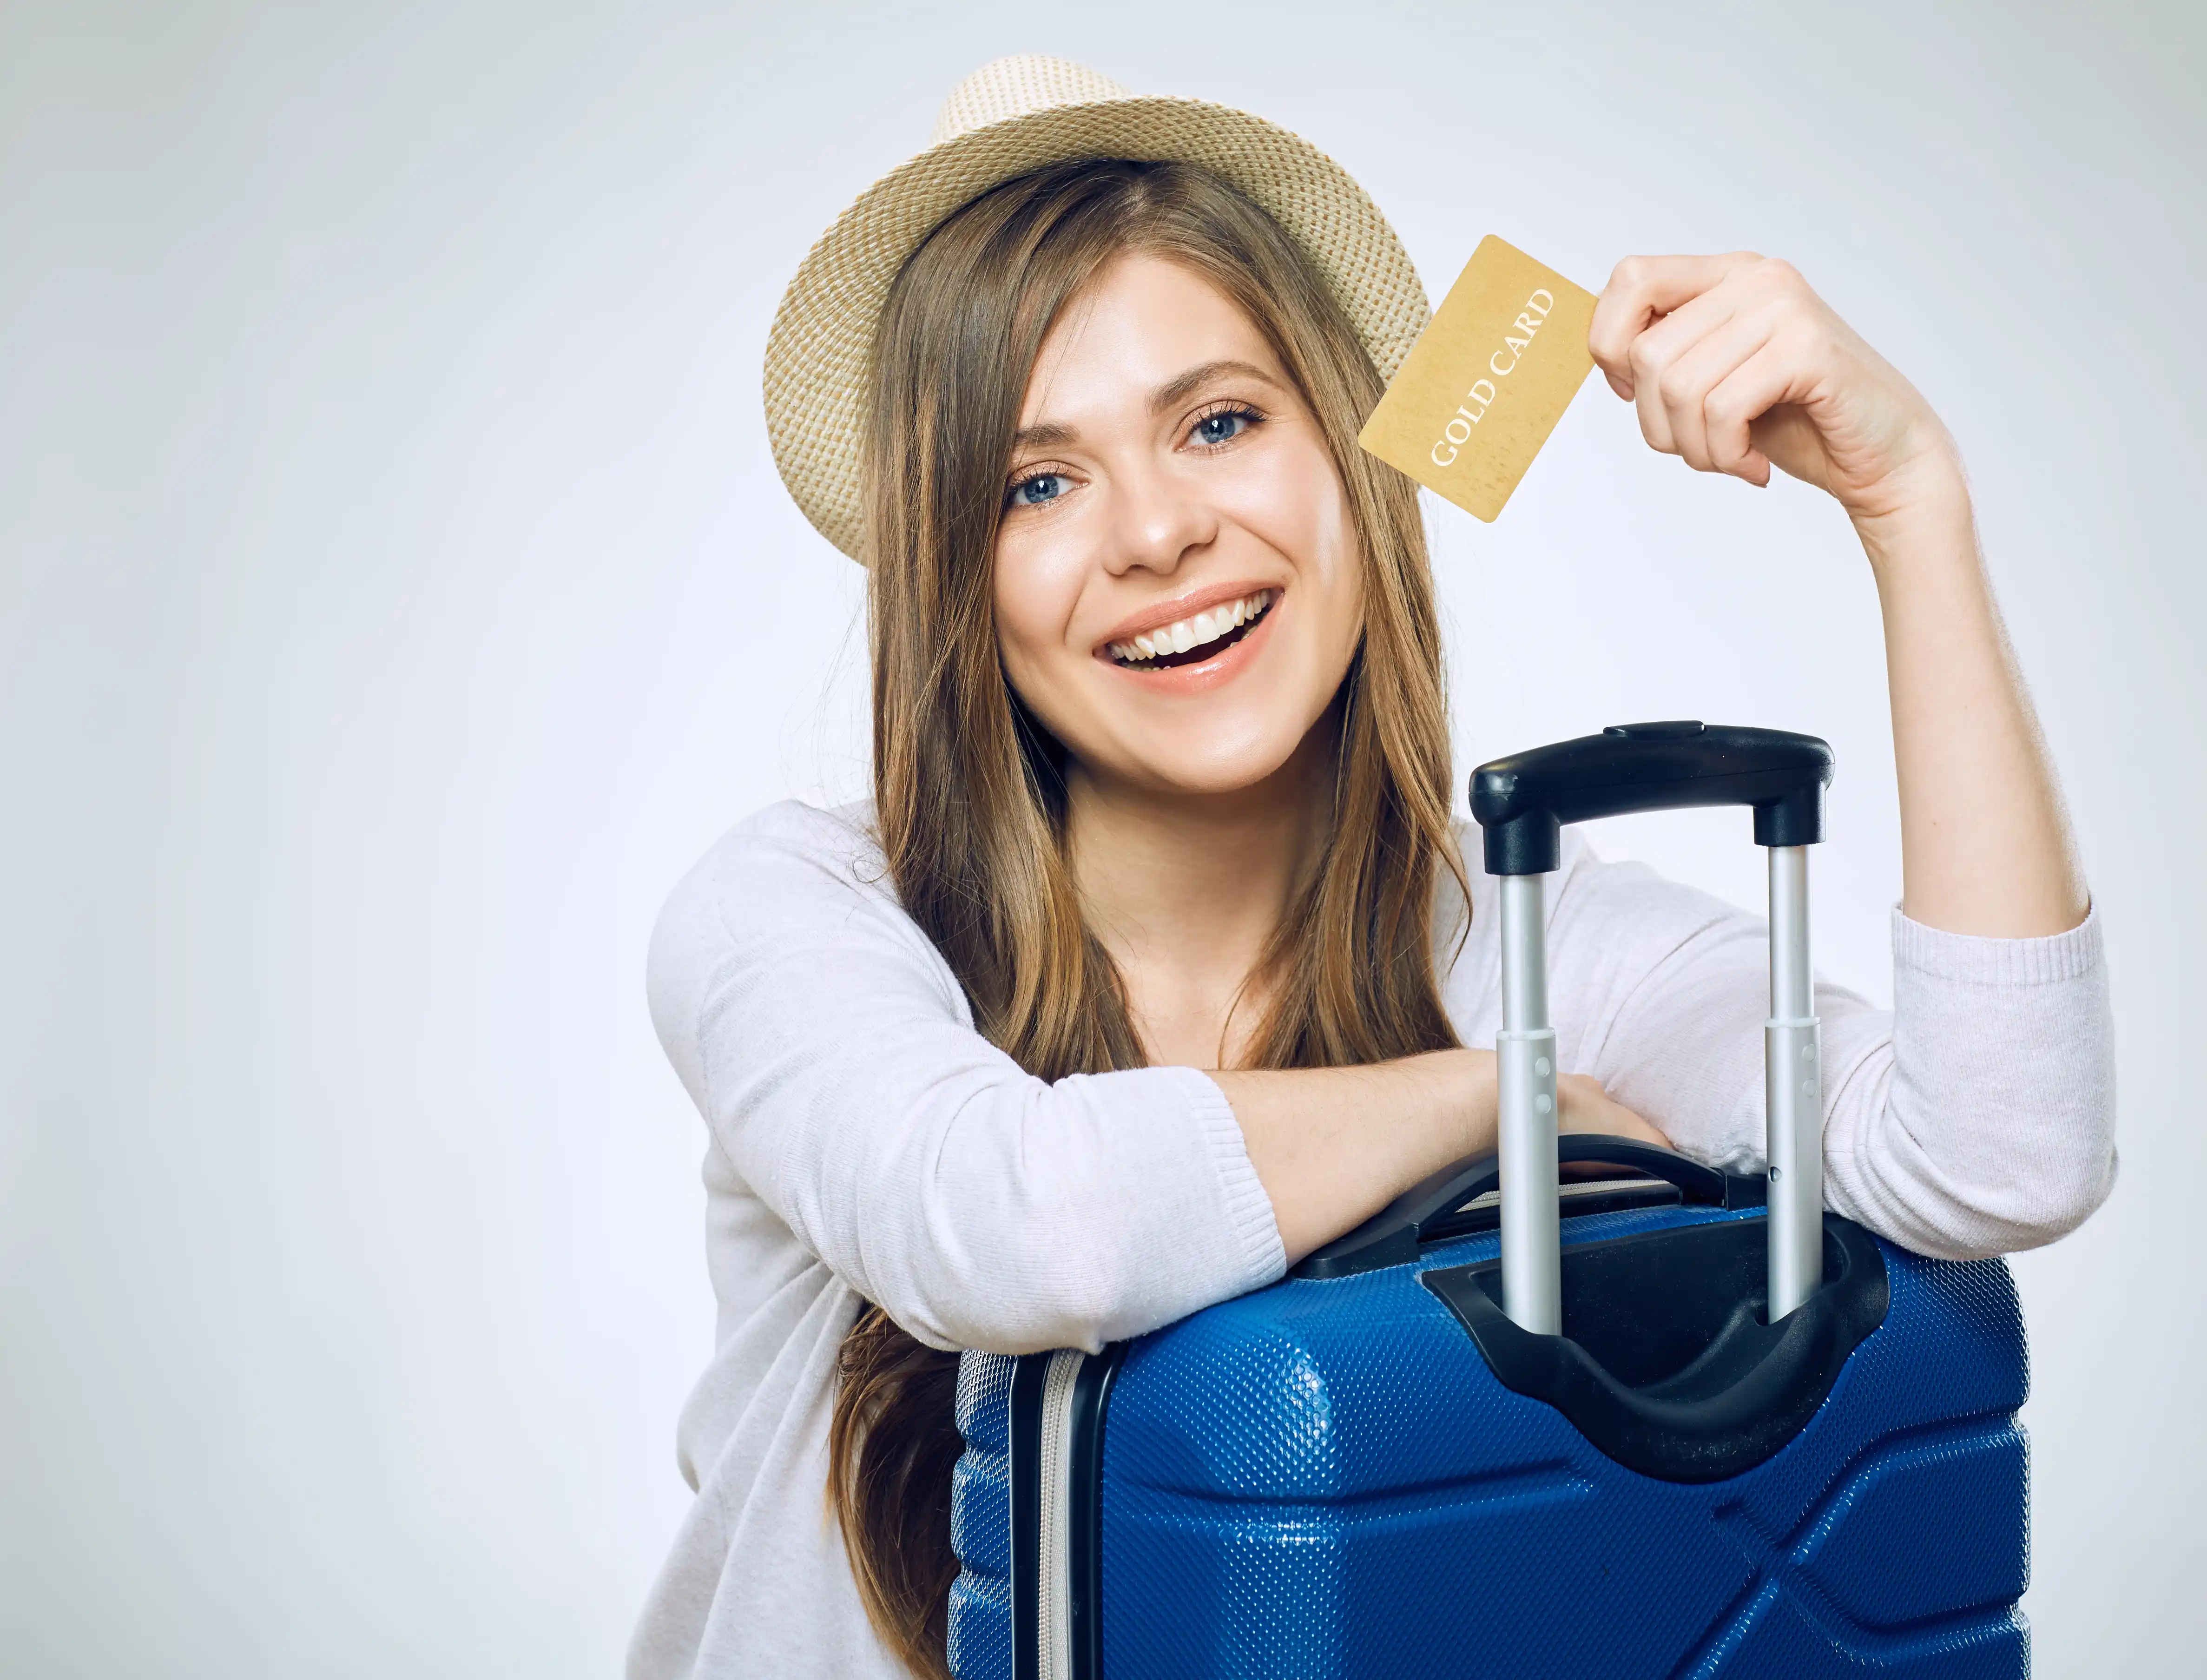 The Top Credit Cards for People Who Travel